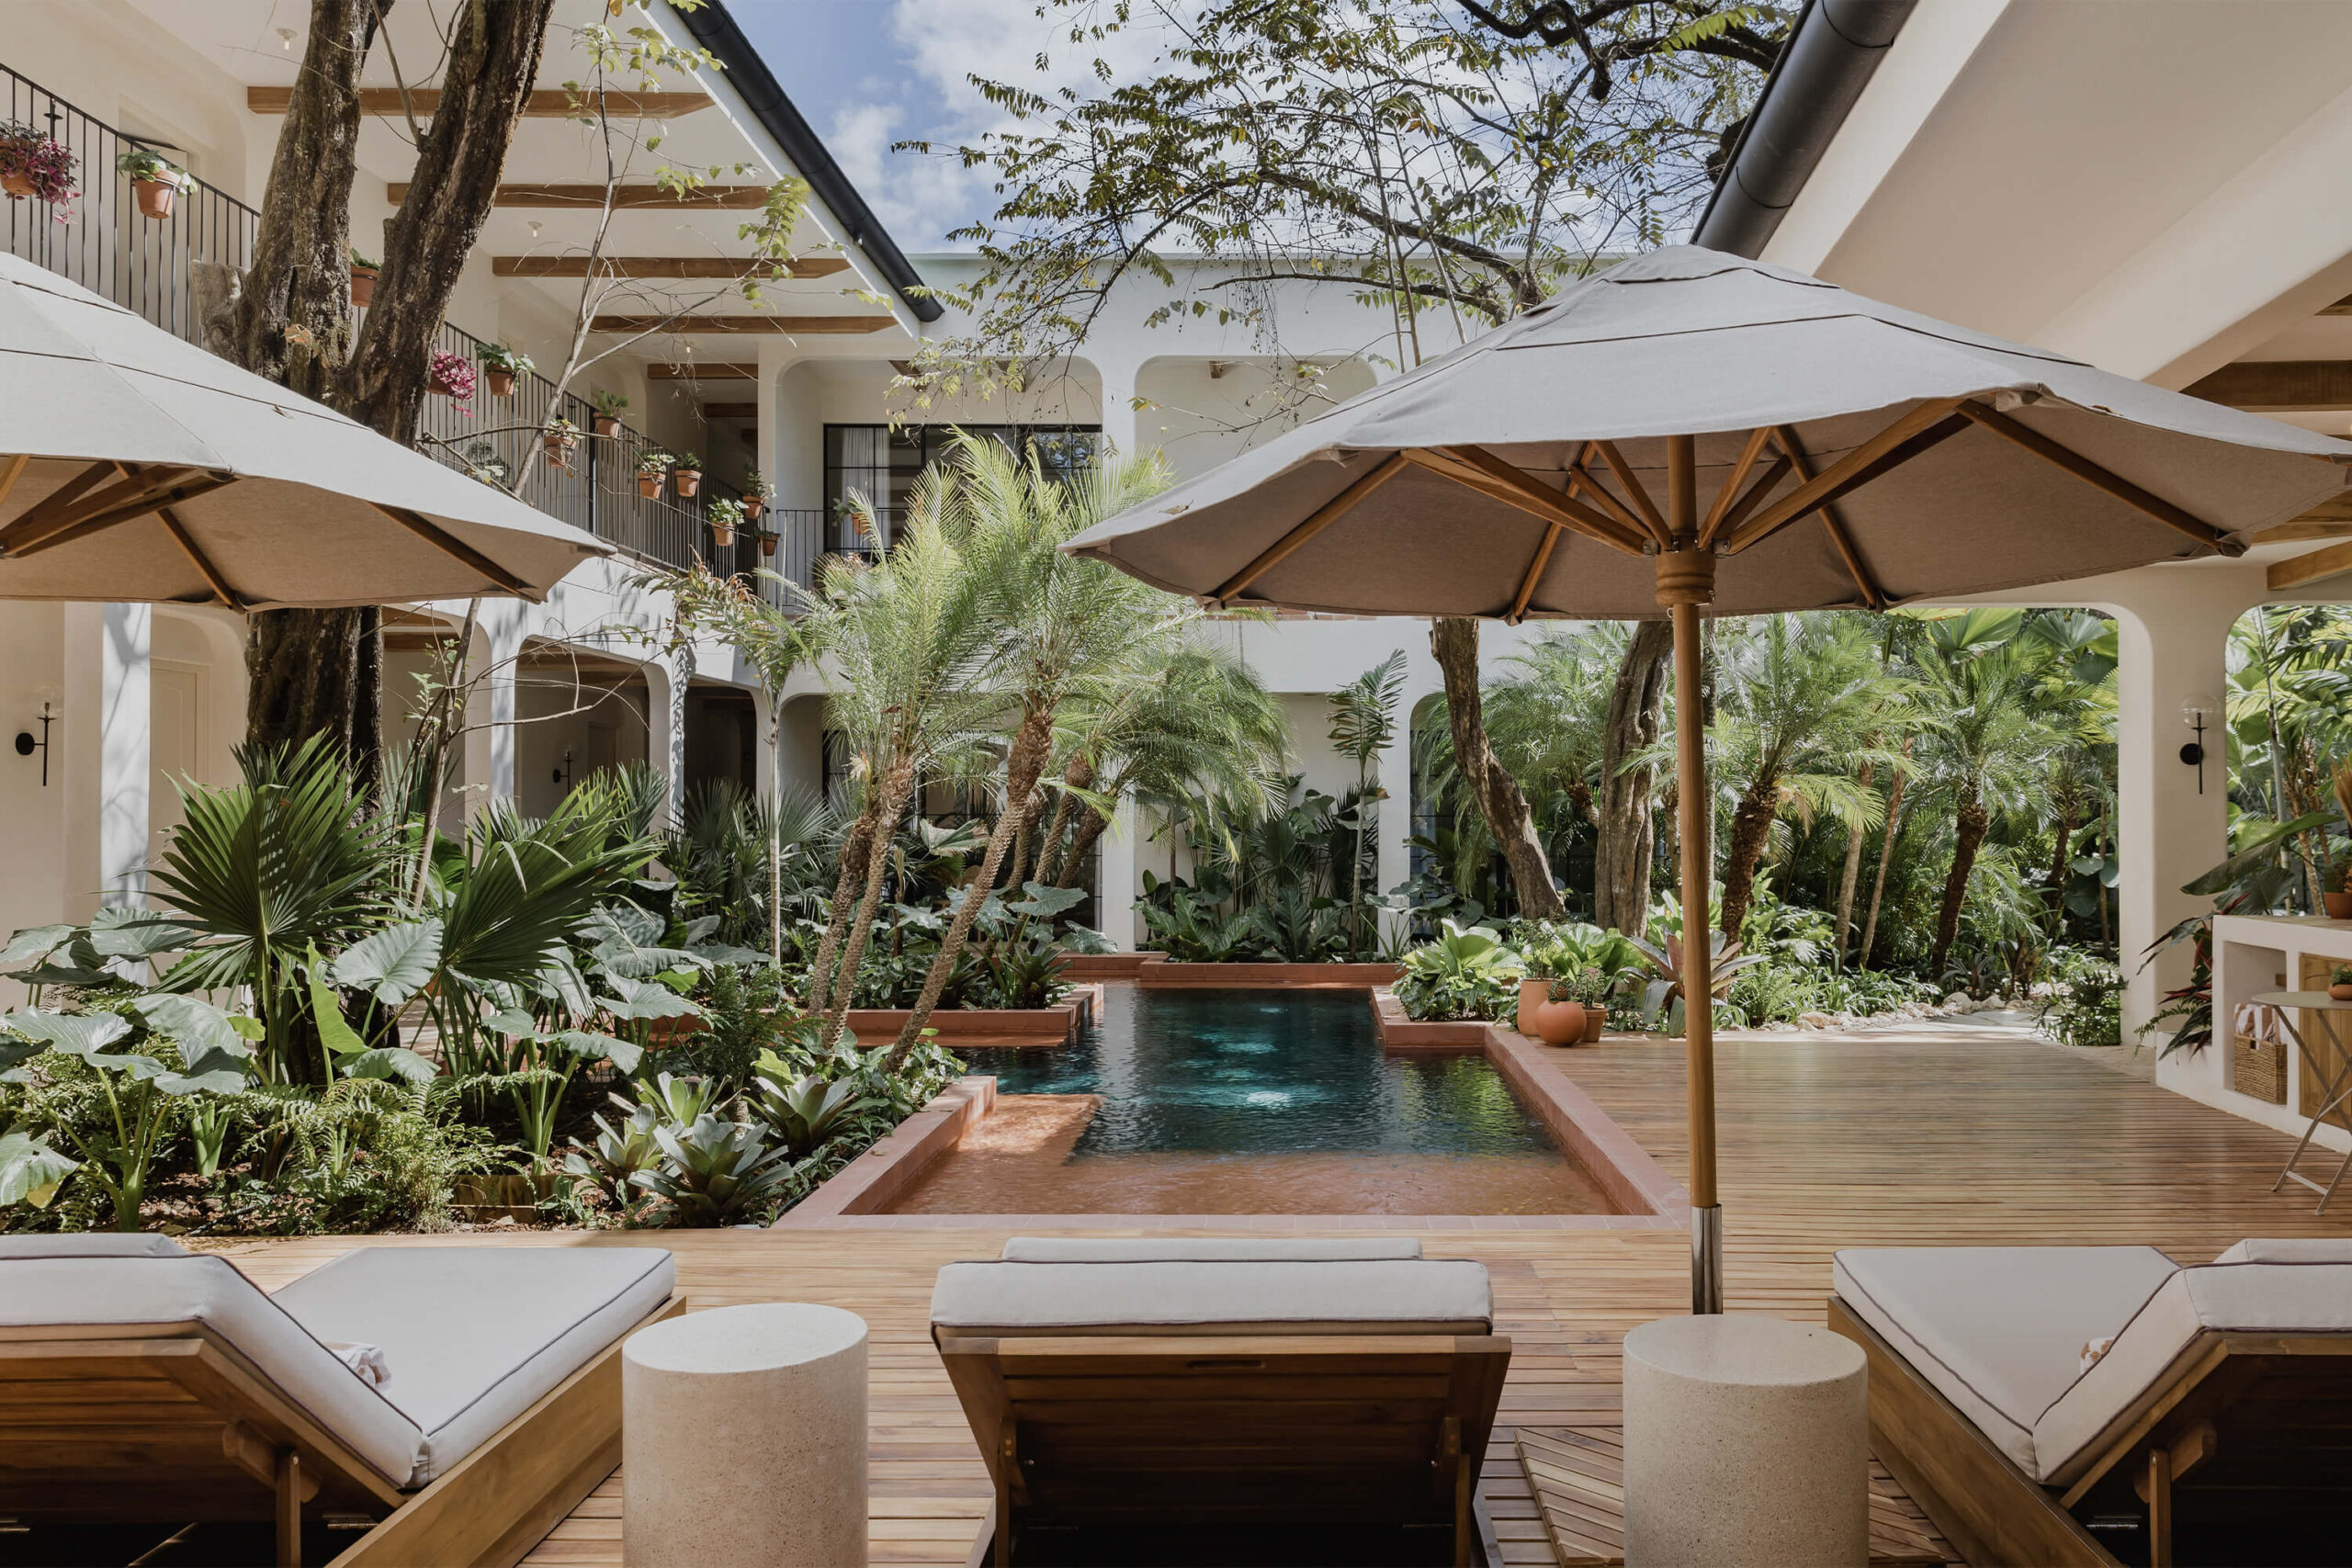 This Under-the-Radar Costa Rican Beach Town Now Has a Chic Hotel Perfect for Digital Nomads